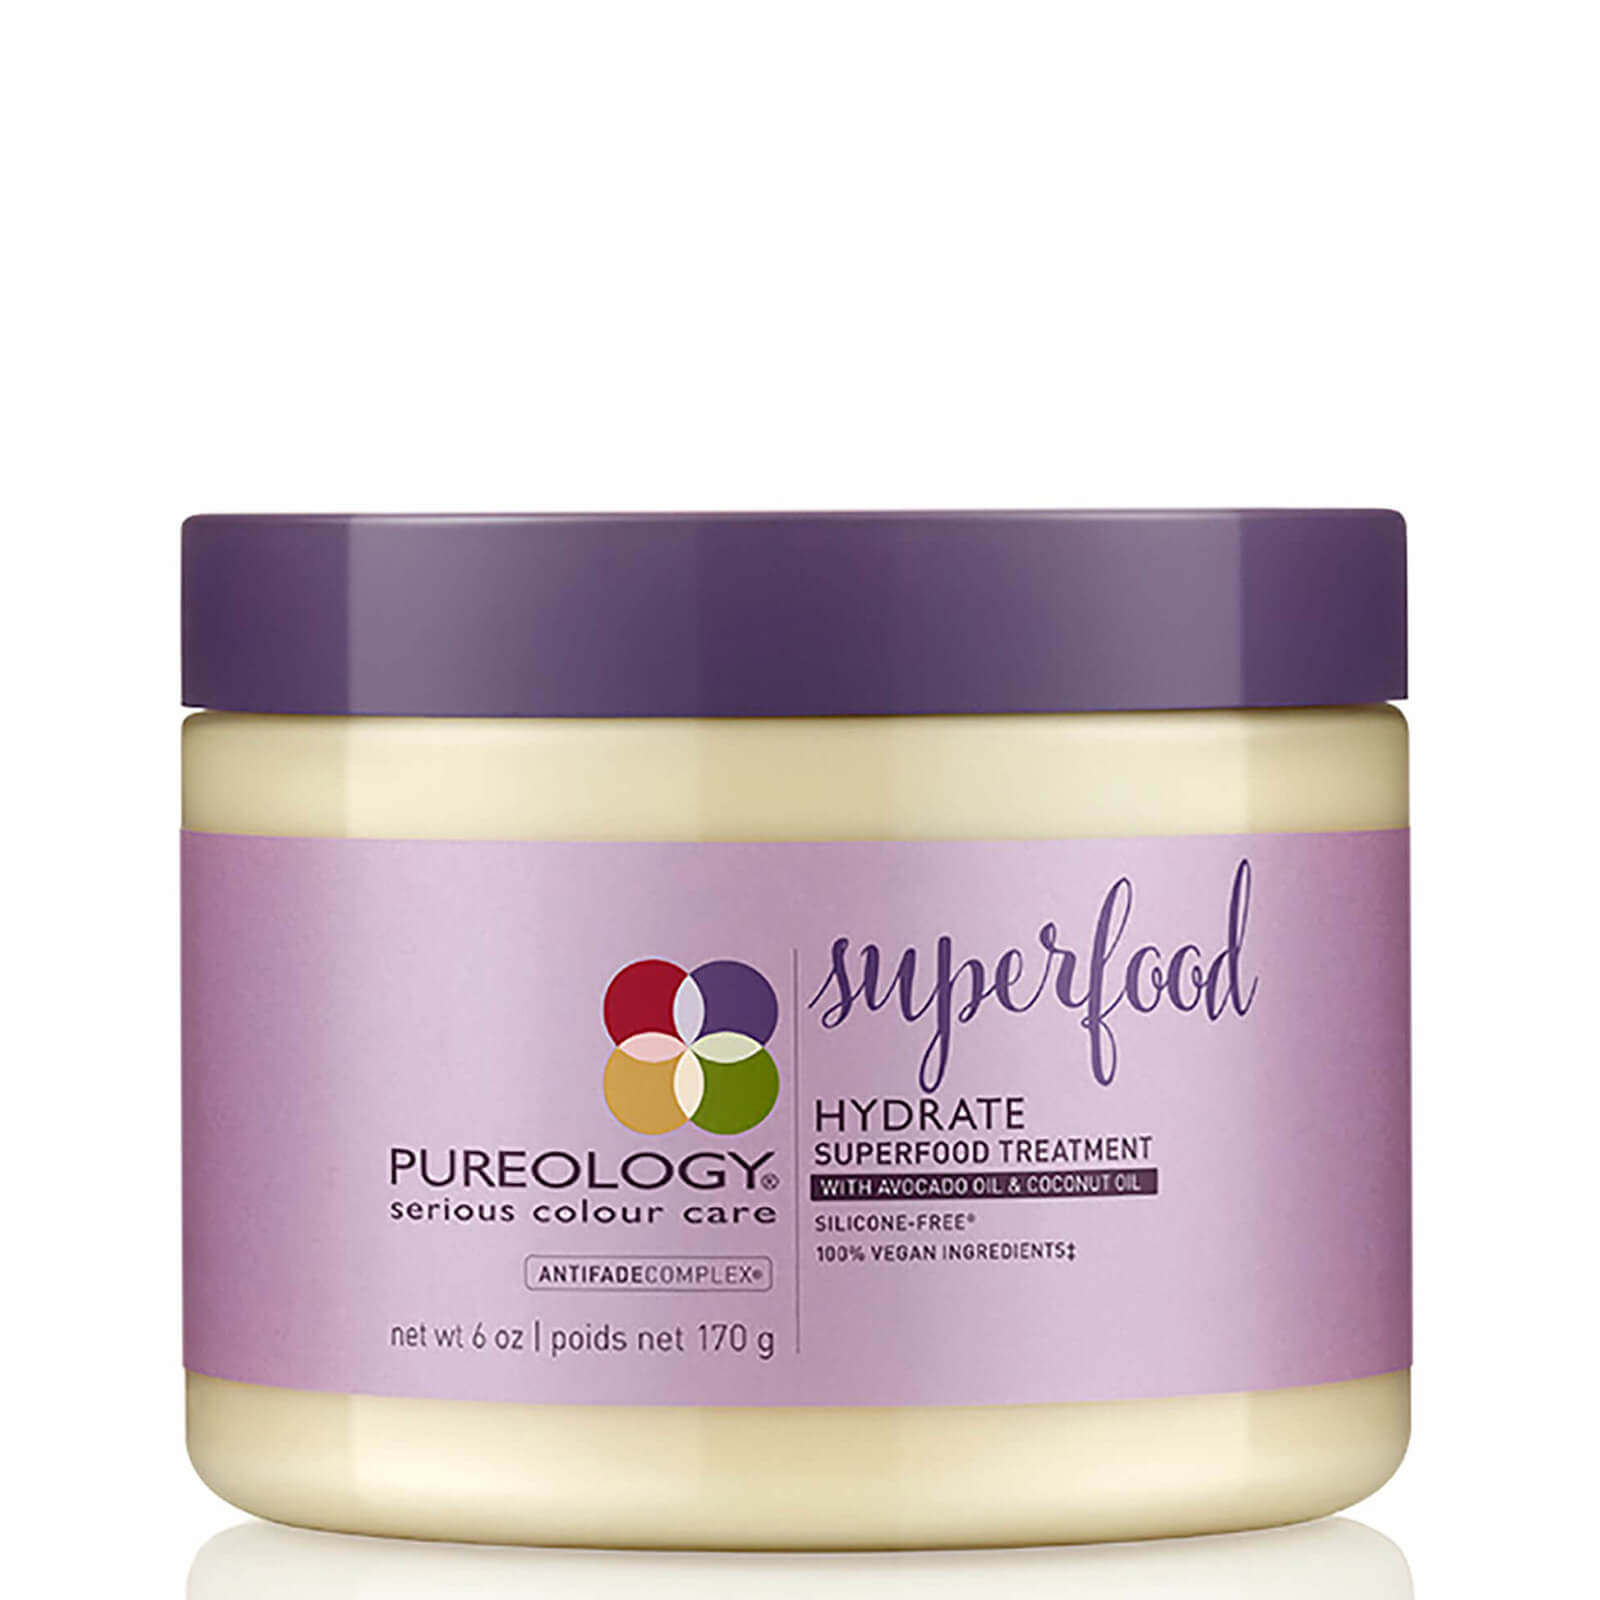 Mascarilla Hydrate Colour Care Superfood de Pureology (170 g)